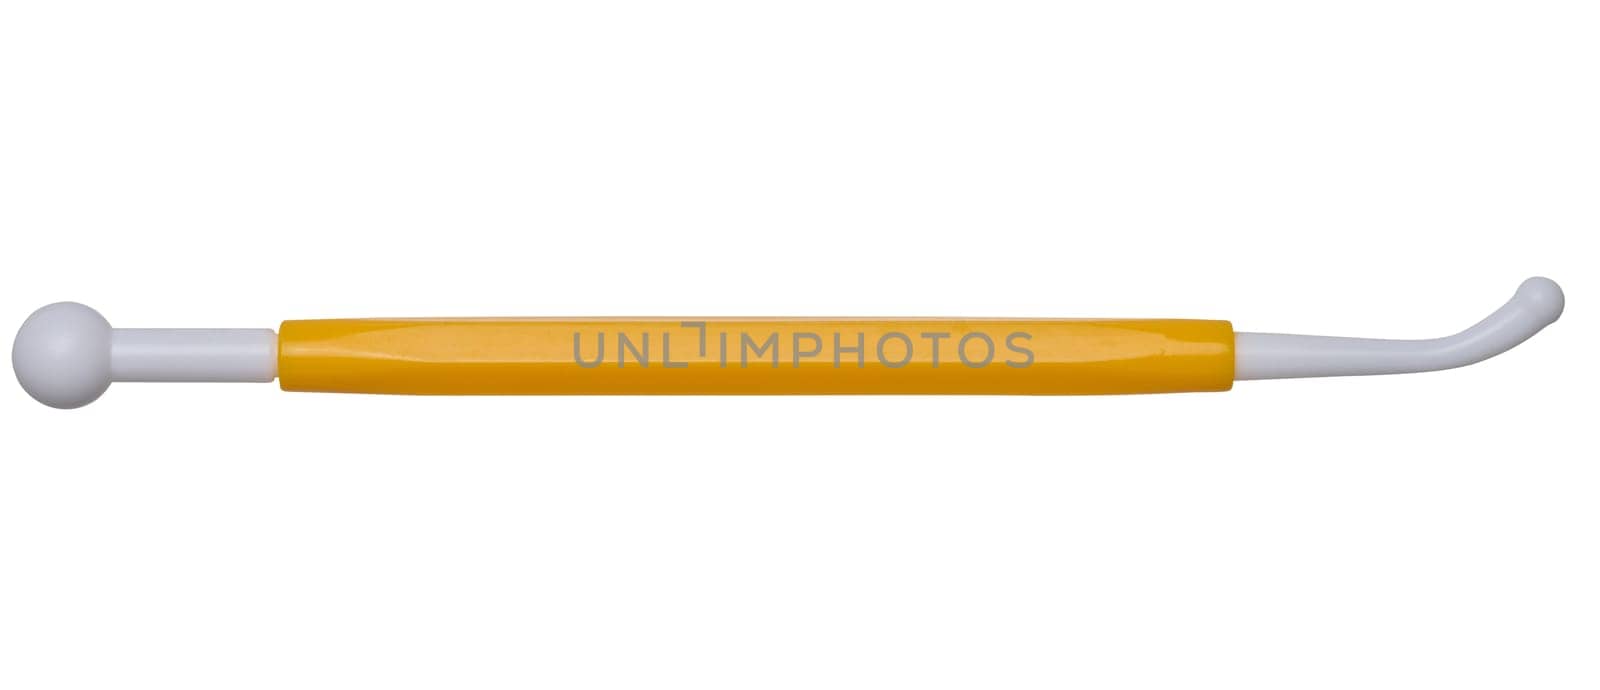 Plastic spatula for modeling plasticine on an isolated background, top view